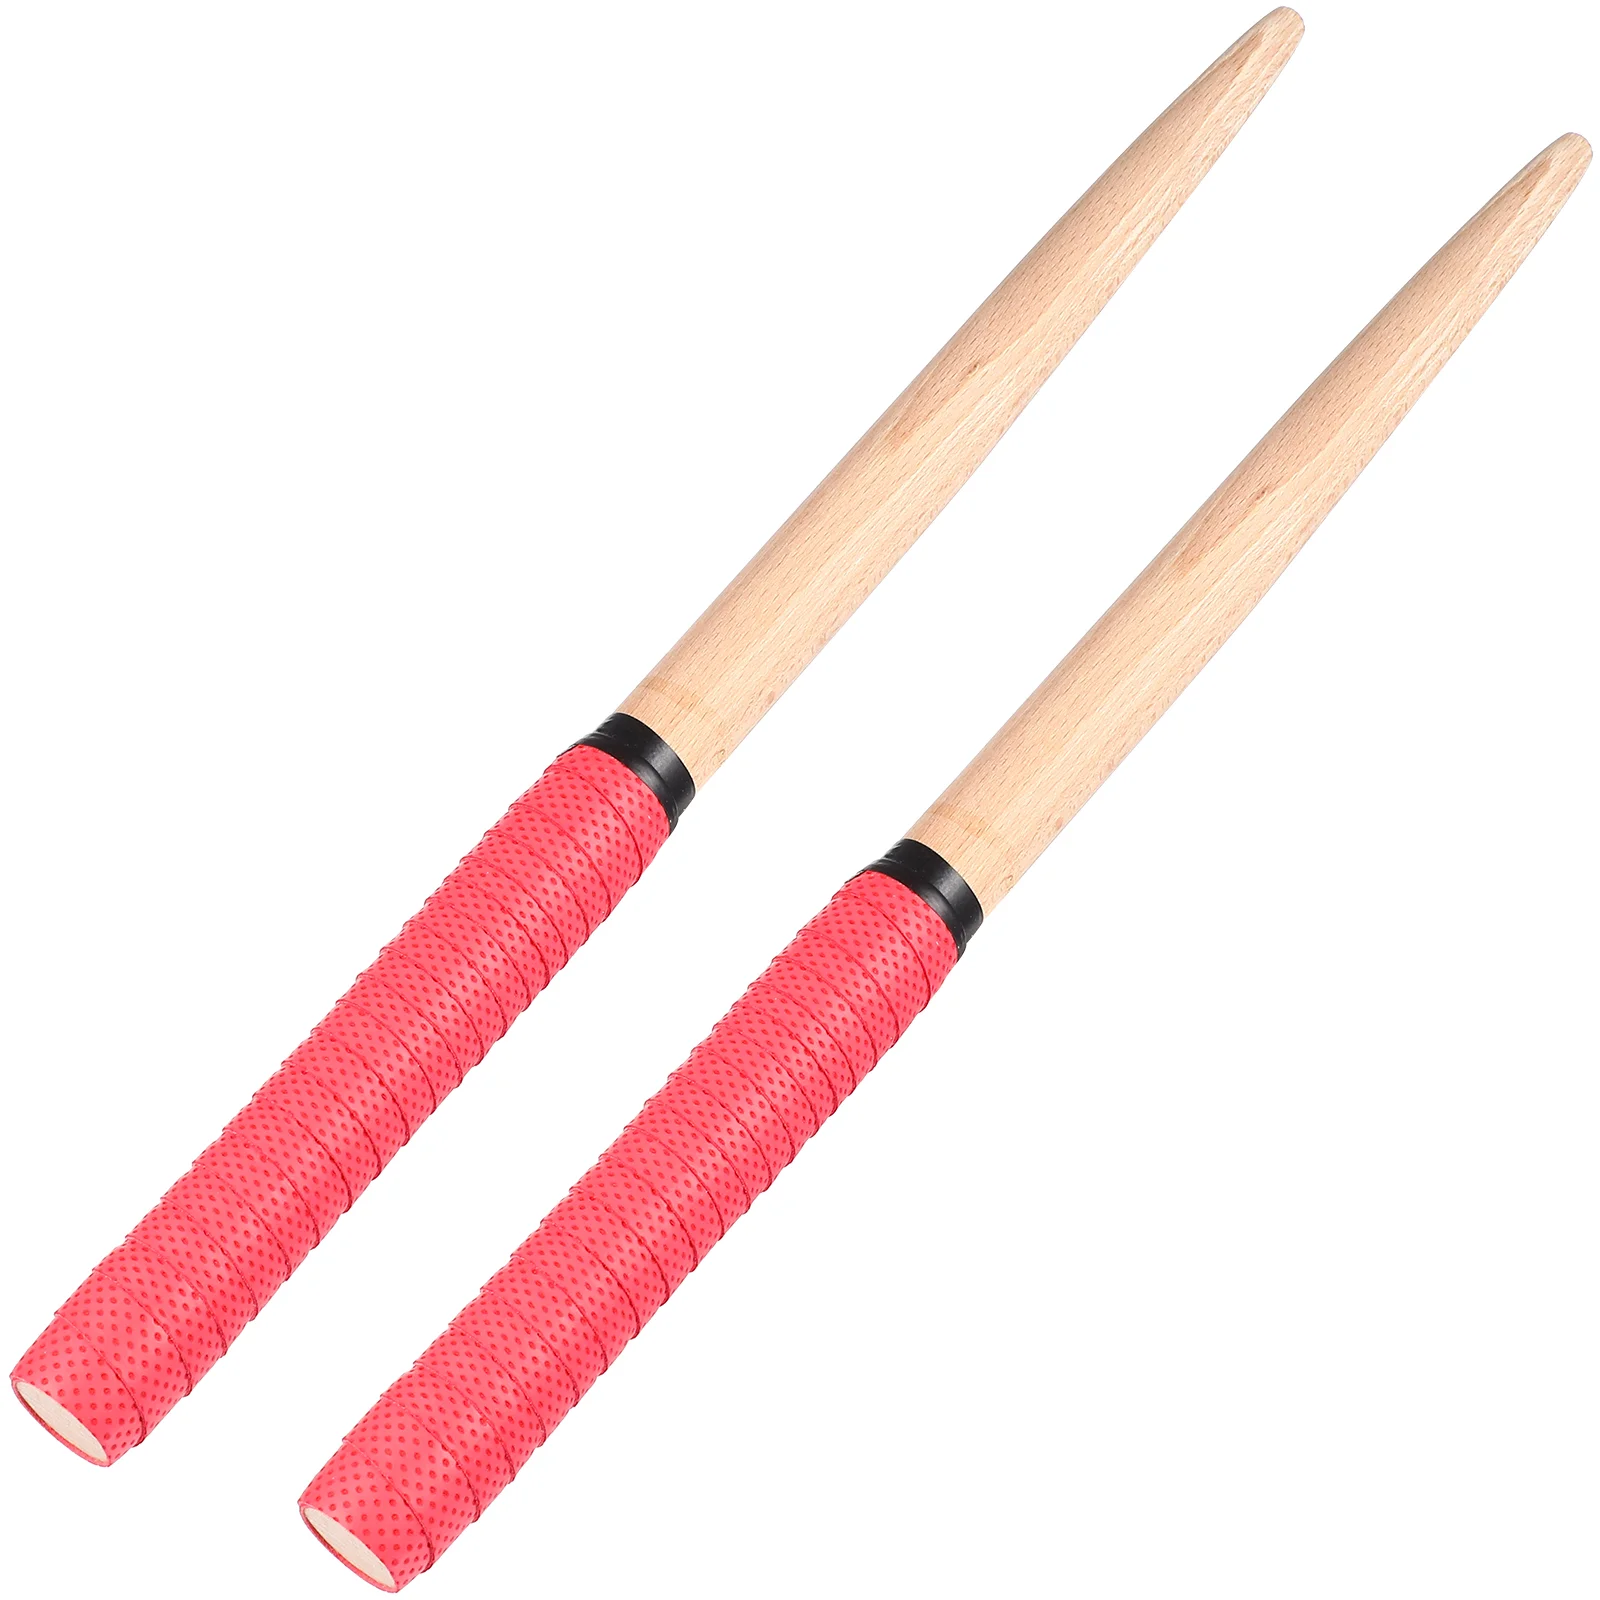 Professional Percussion Sticks Maibachi Wood Drumsticks Pair for Musical Instruments